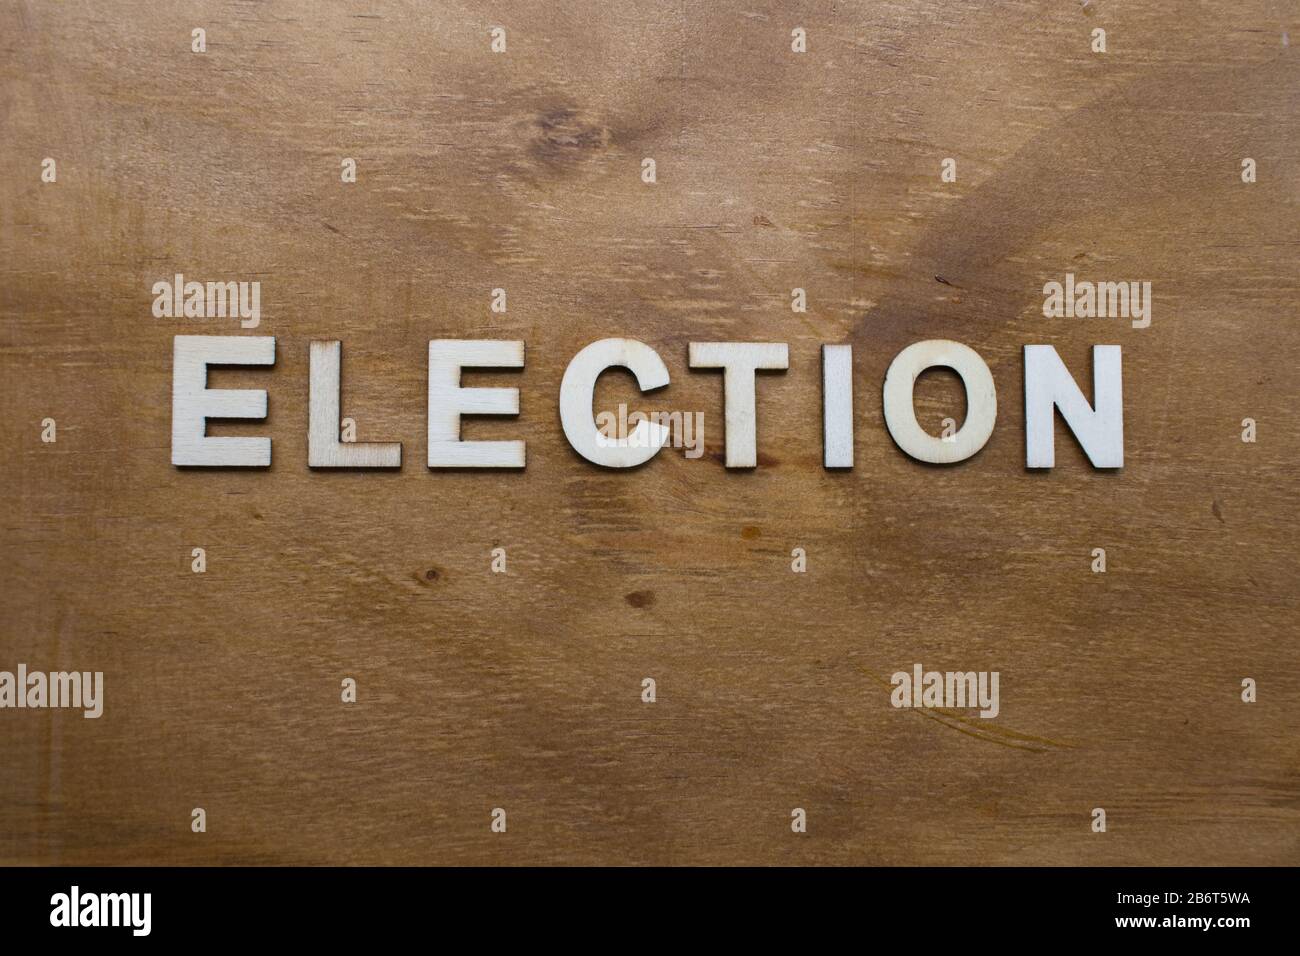 Election concept - letters on wood background. Stock Photo